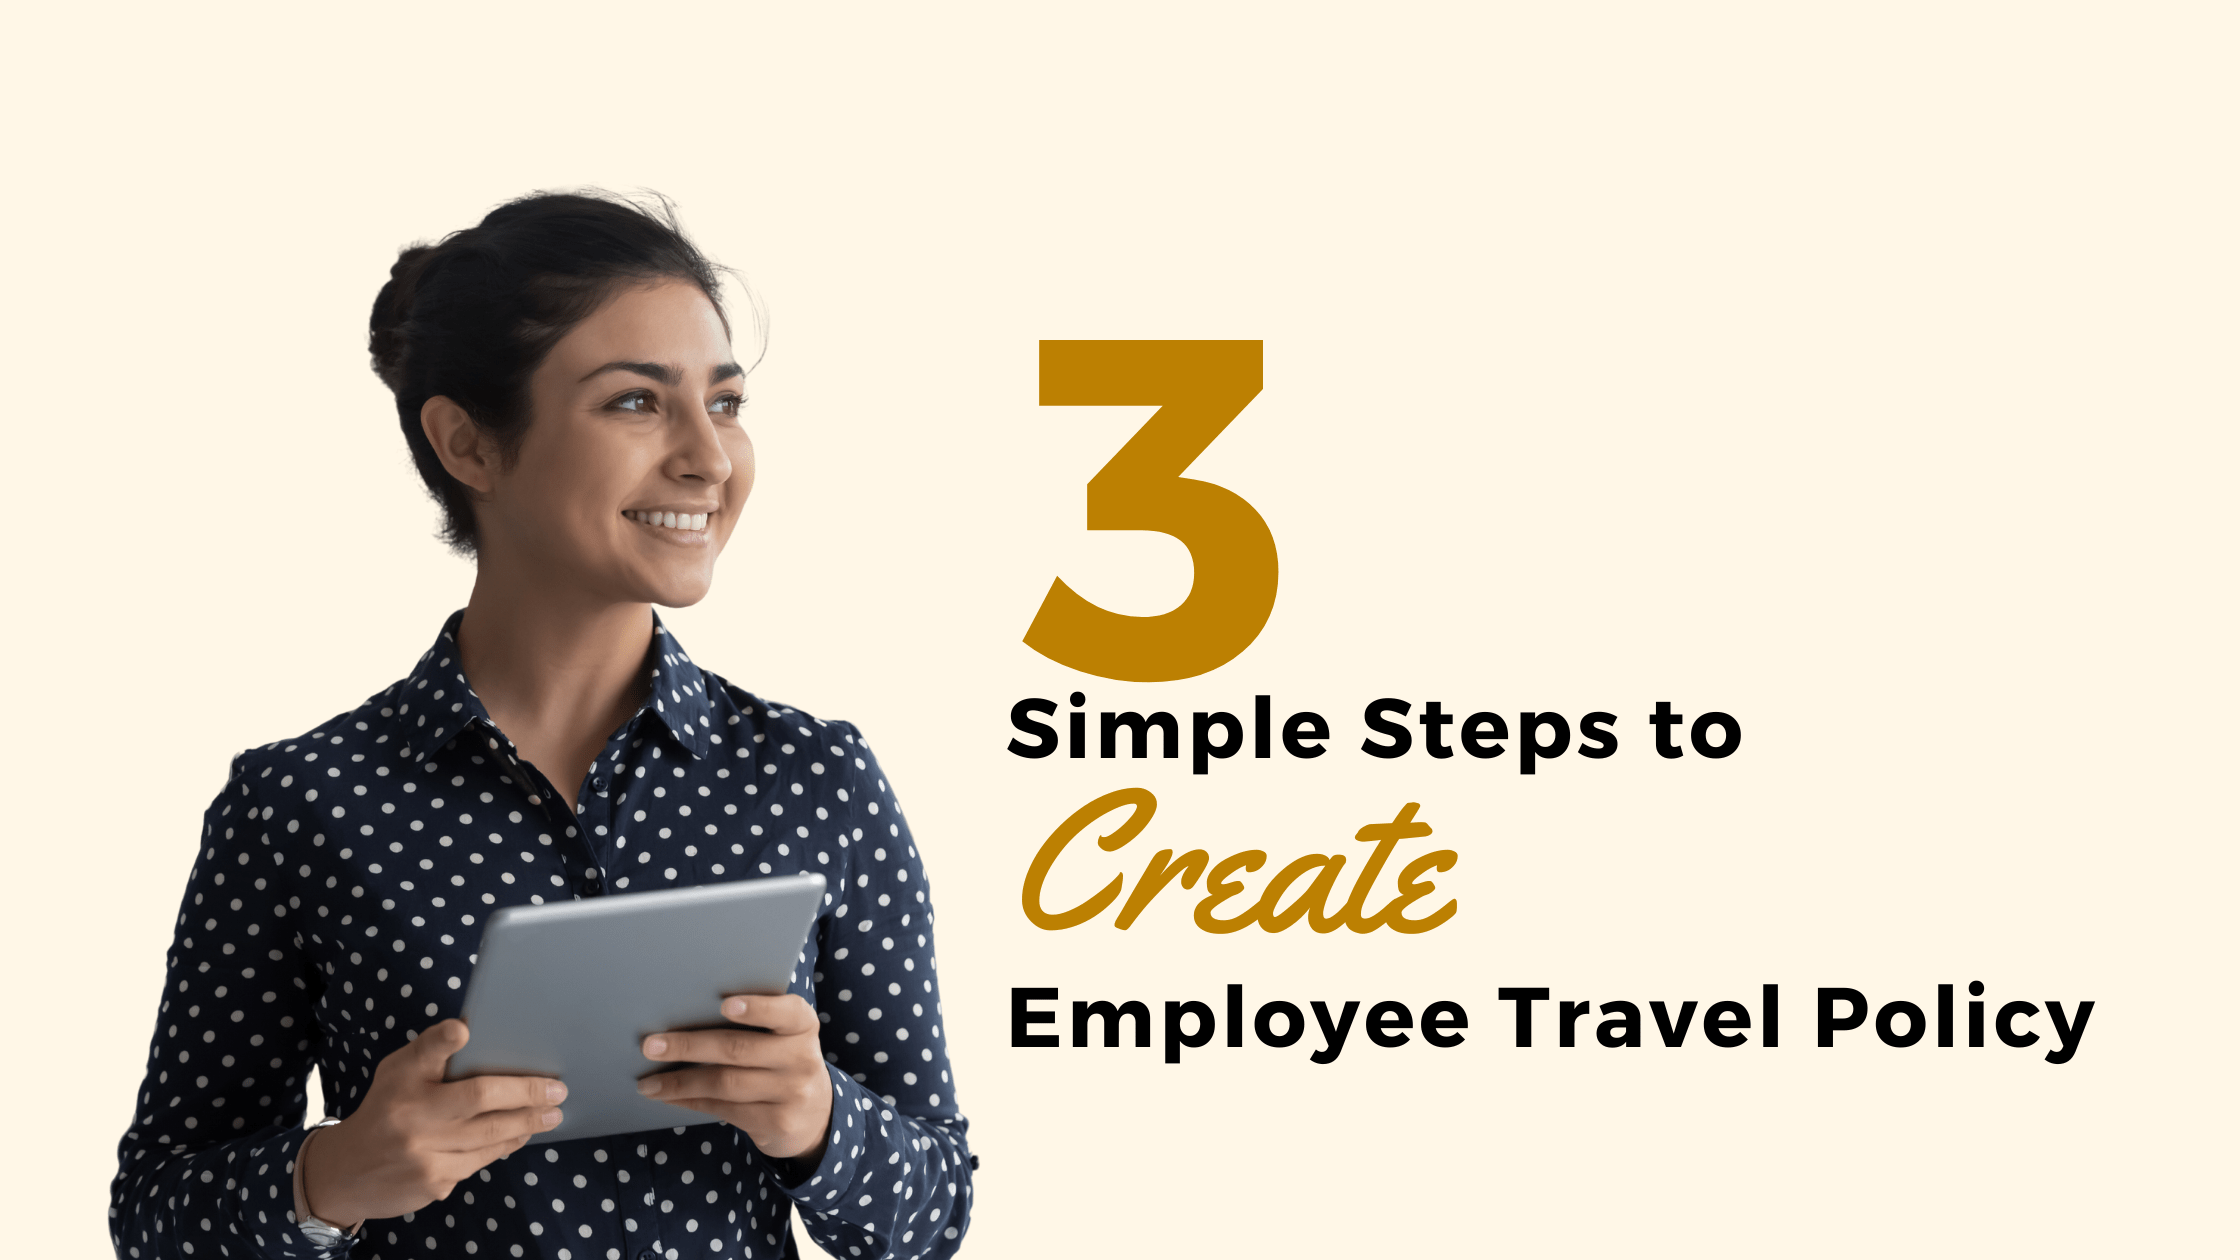 You are currently viewing Employee Travel Policy Simplified